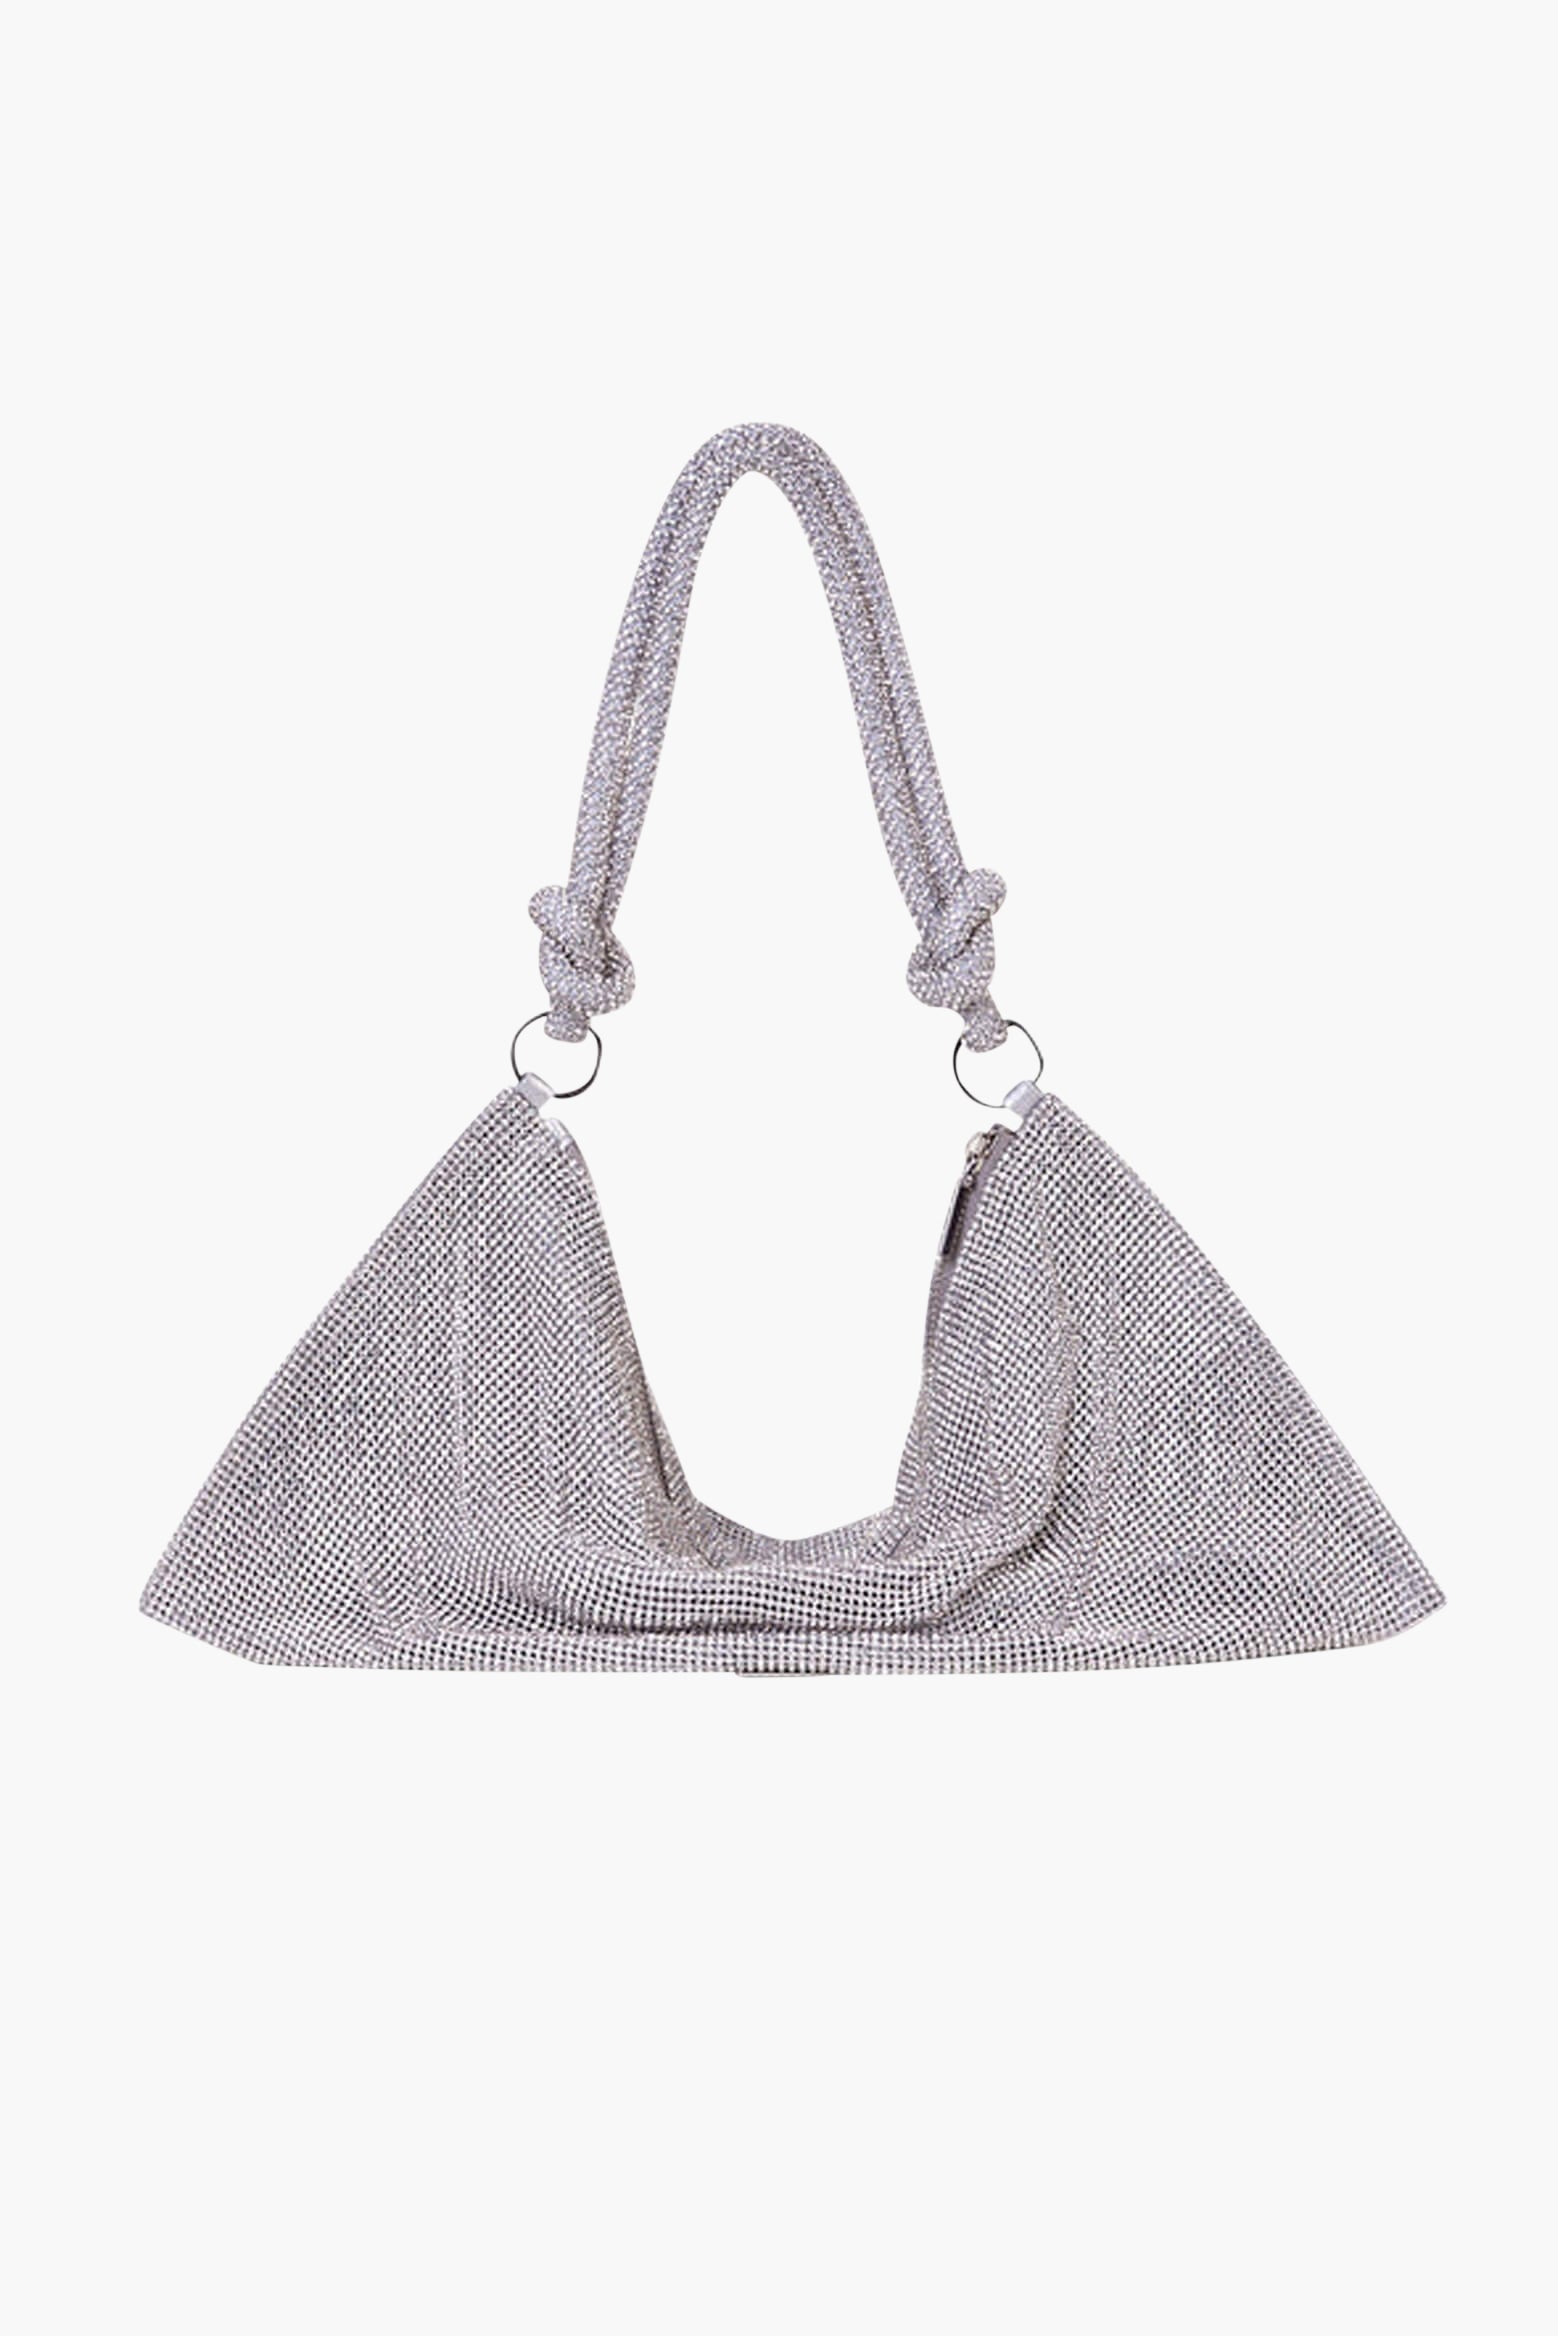 Cult Gaia Hera Mini Shoulder Bag in Clear available at TNT The New Trend Australia.